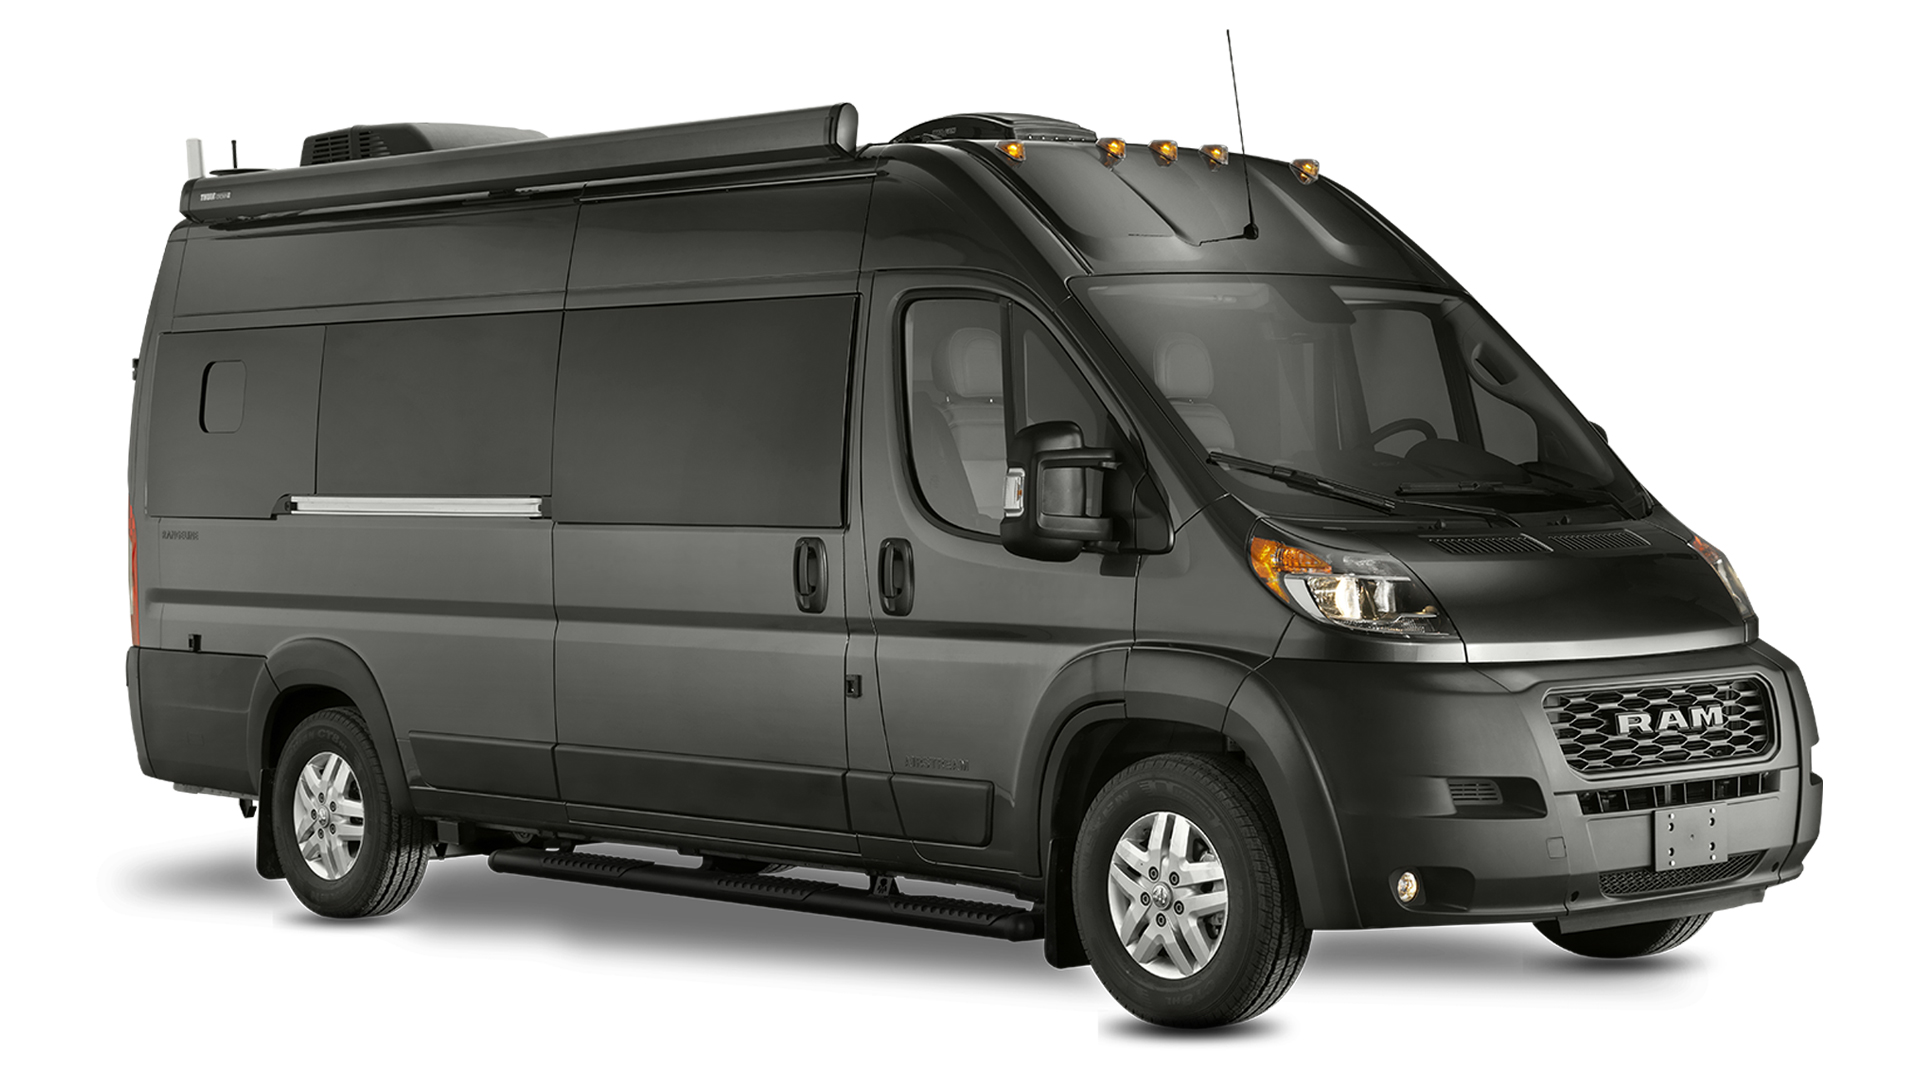 An exterior shot of the Airstream Rangeline touring coach that is black